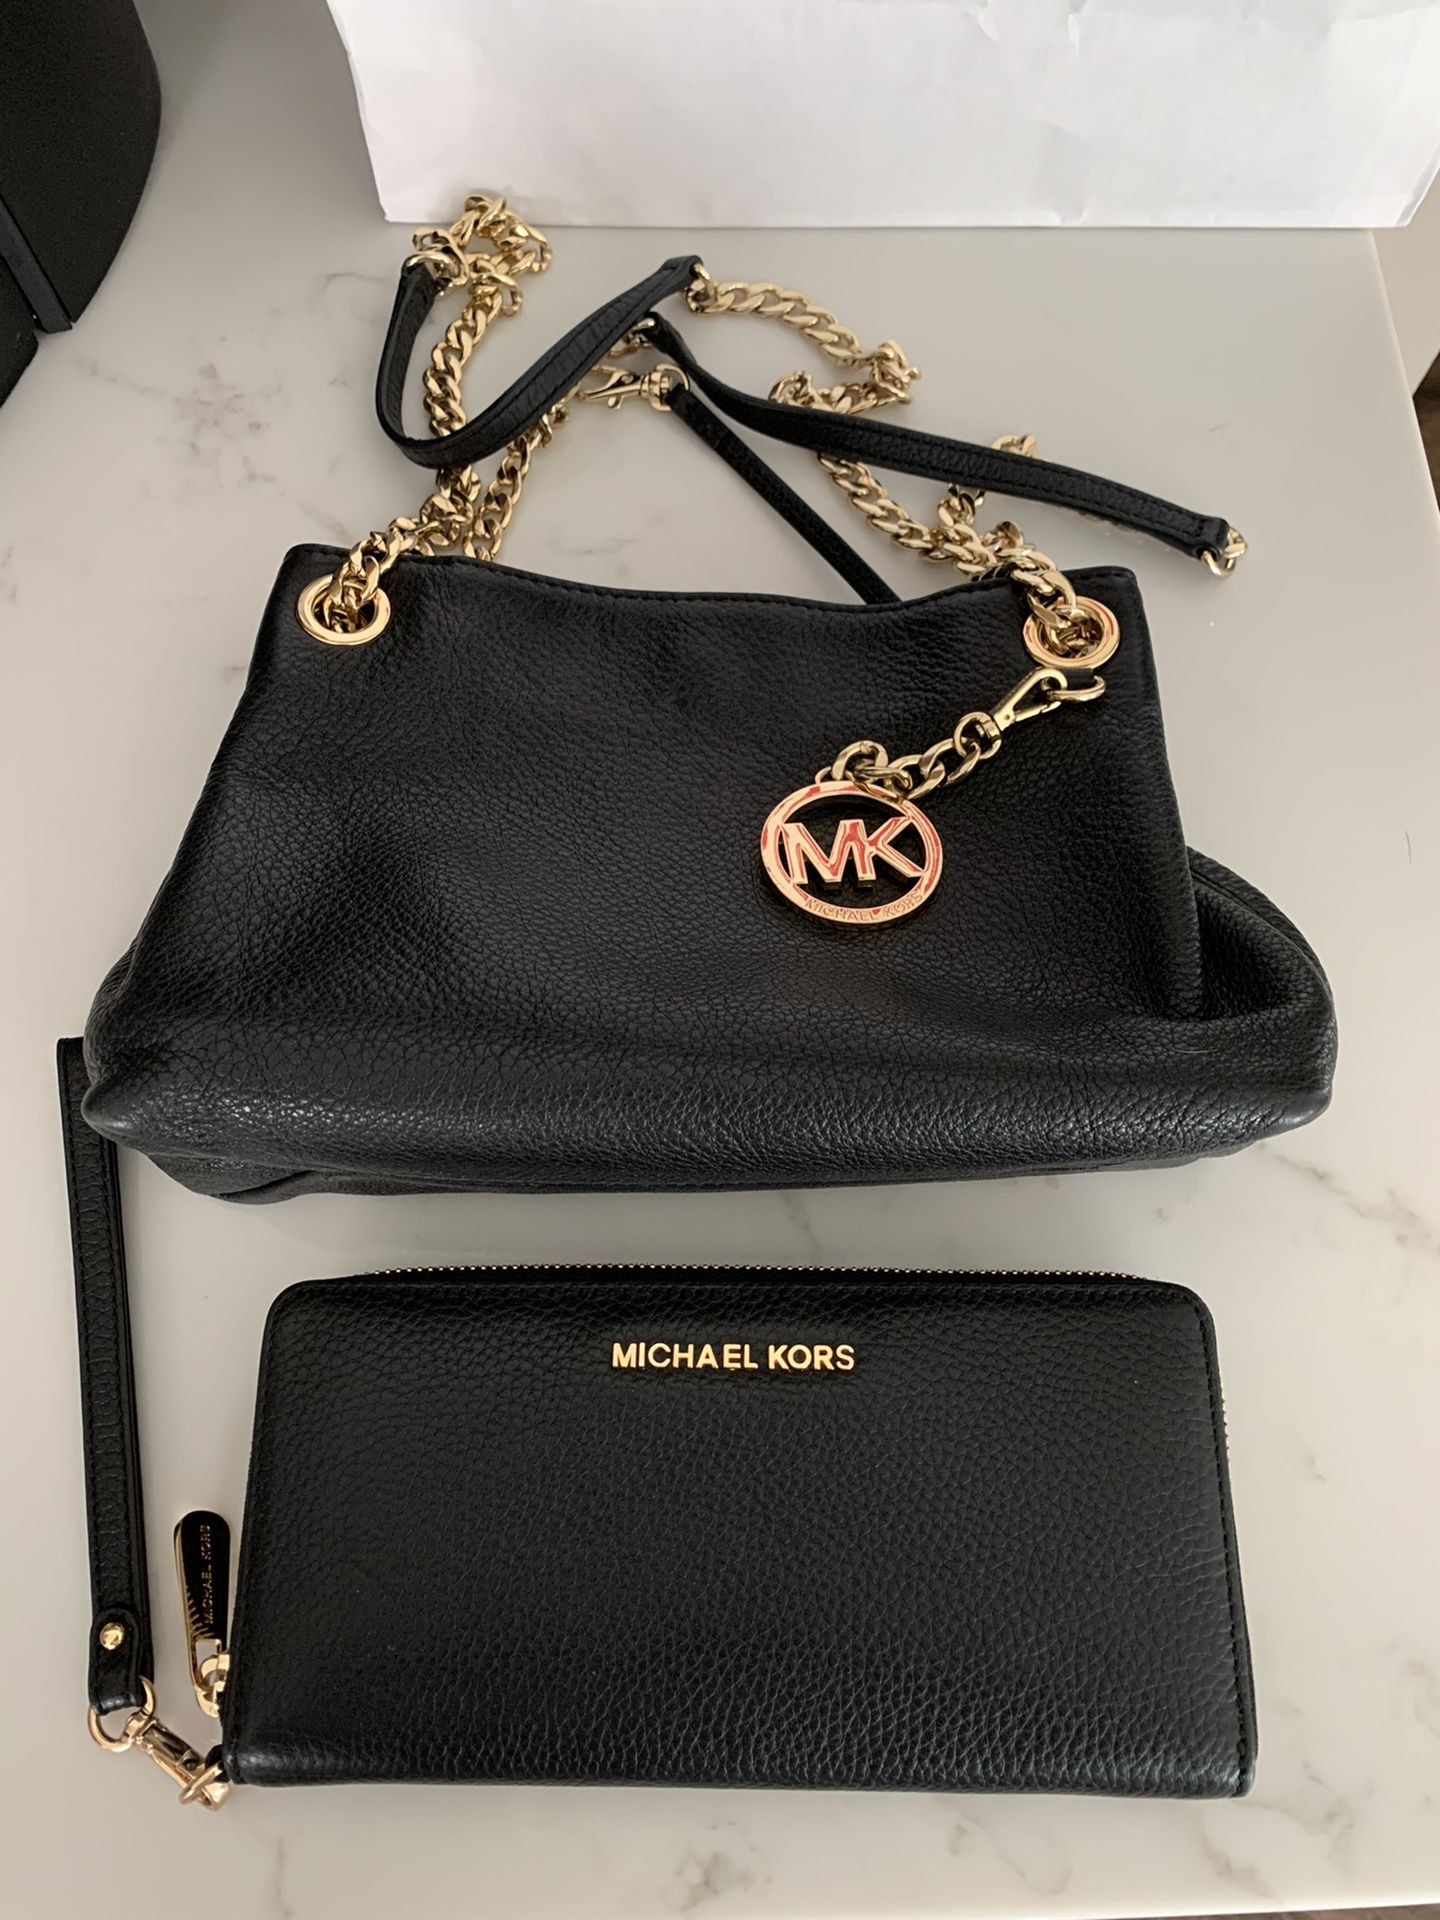 Authentic michael kors bag and wallet